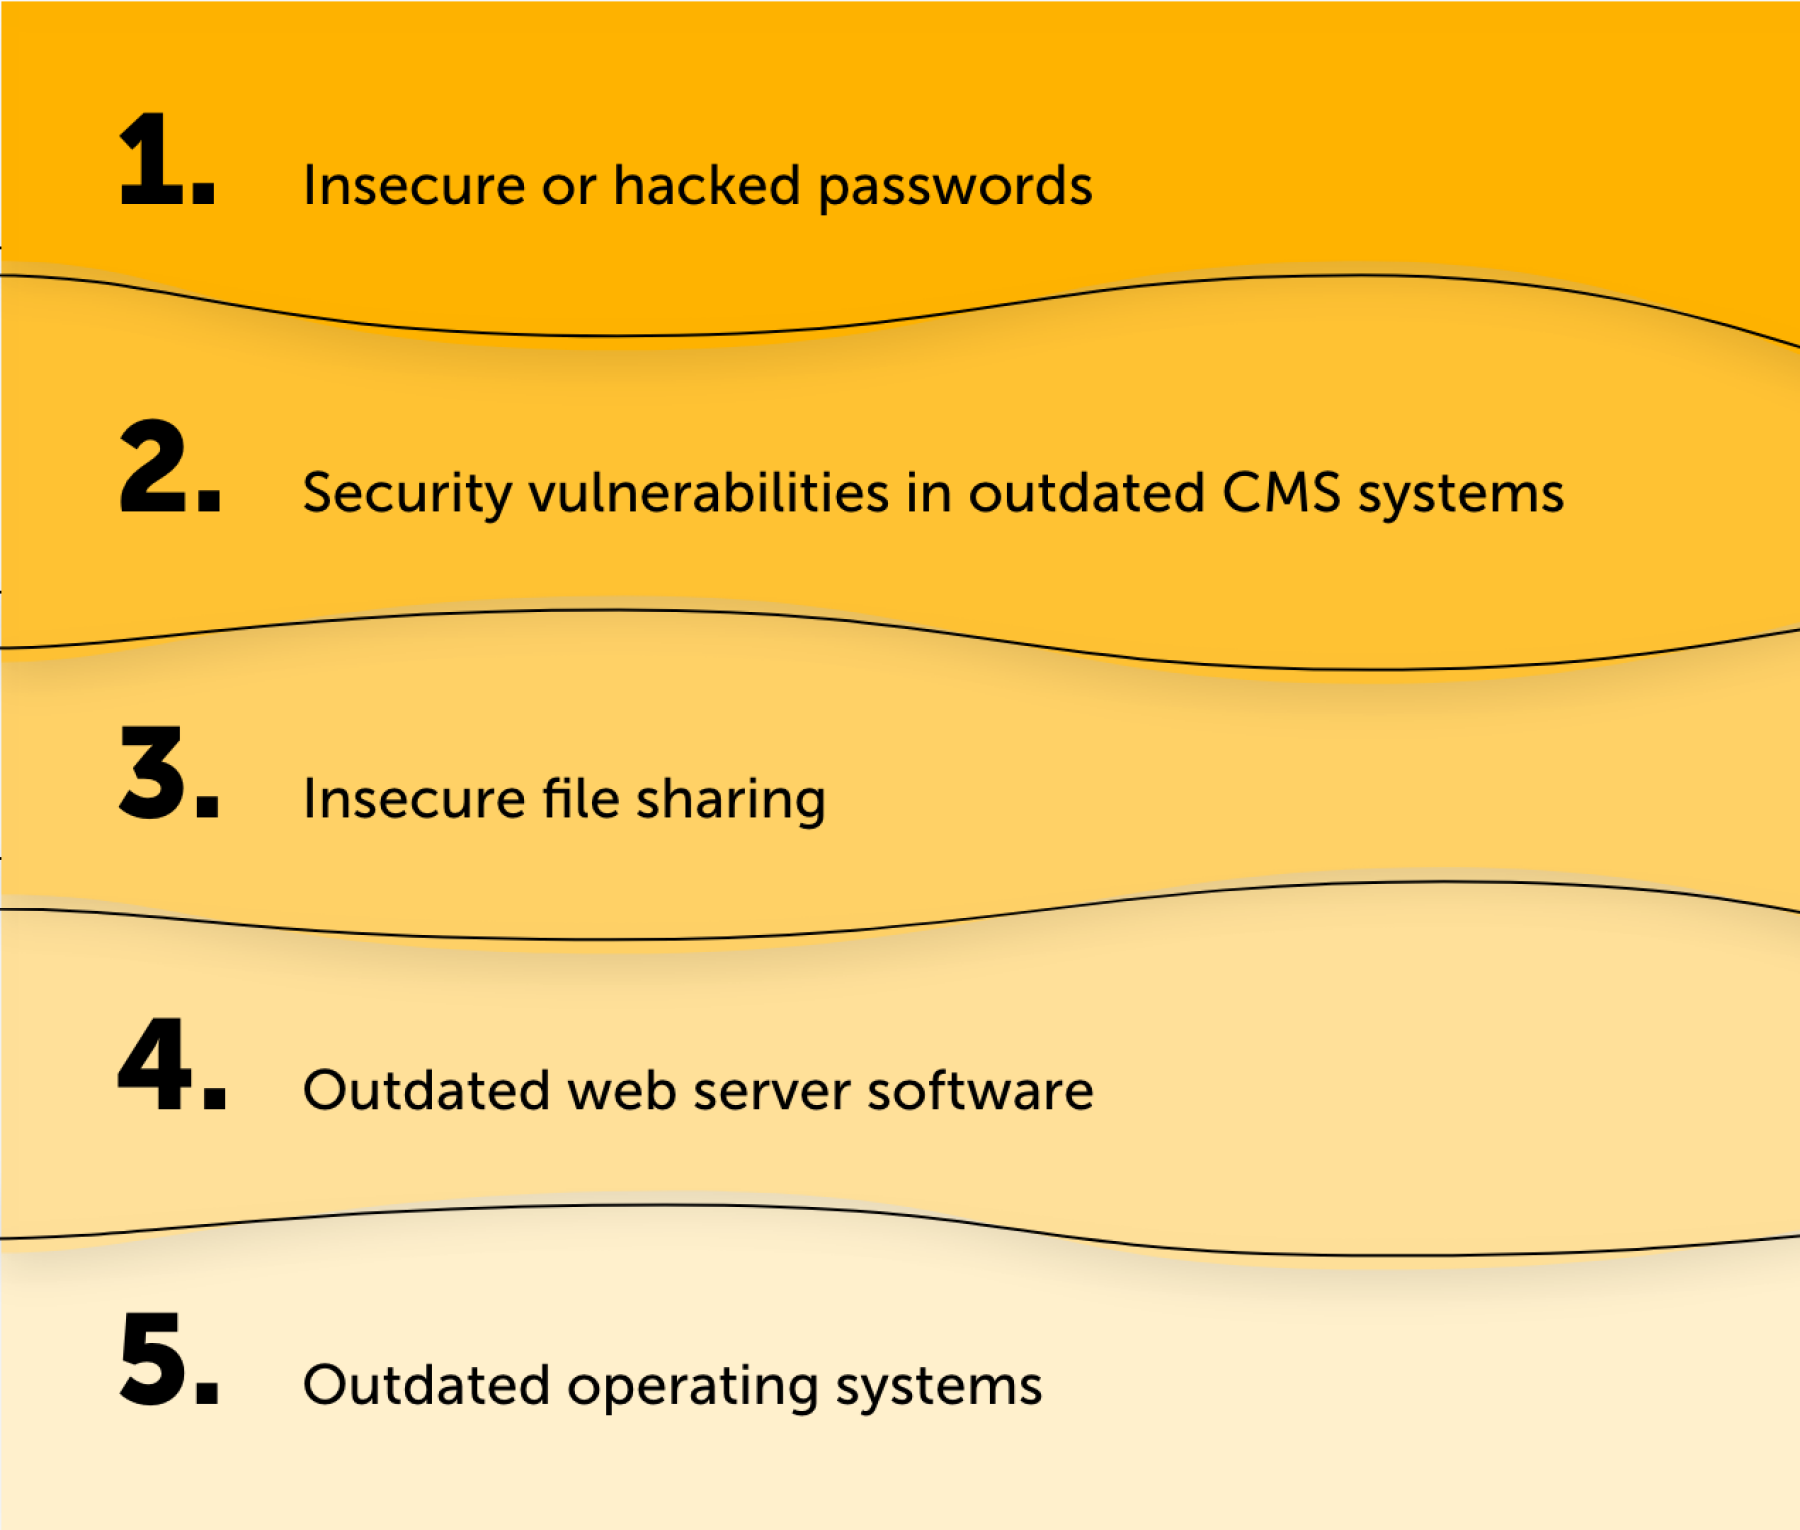 Most serious vulnerabilities 2021: 1. 	insecure or hacked passwords, 2.	 security vulnerabilities in outdated CMS systems (Wordpress, Joomla), 3.	 insecure file sharing (ownCloud, QNAP), 4.	outdated web server software (PHP, jQuery, OpenSSL, Apache), 5.	outdated operating systems (Windows, Linux)